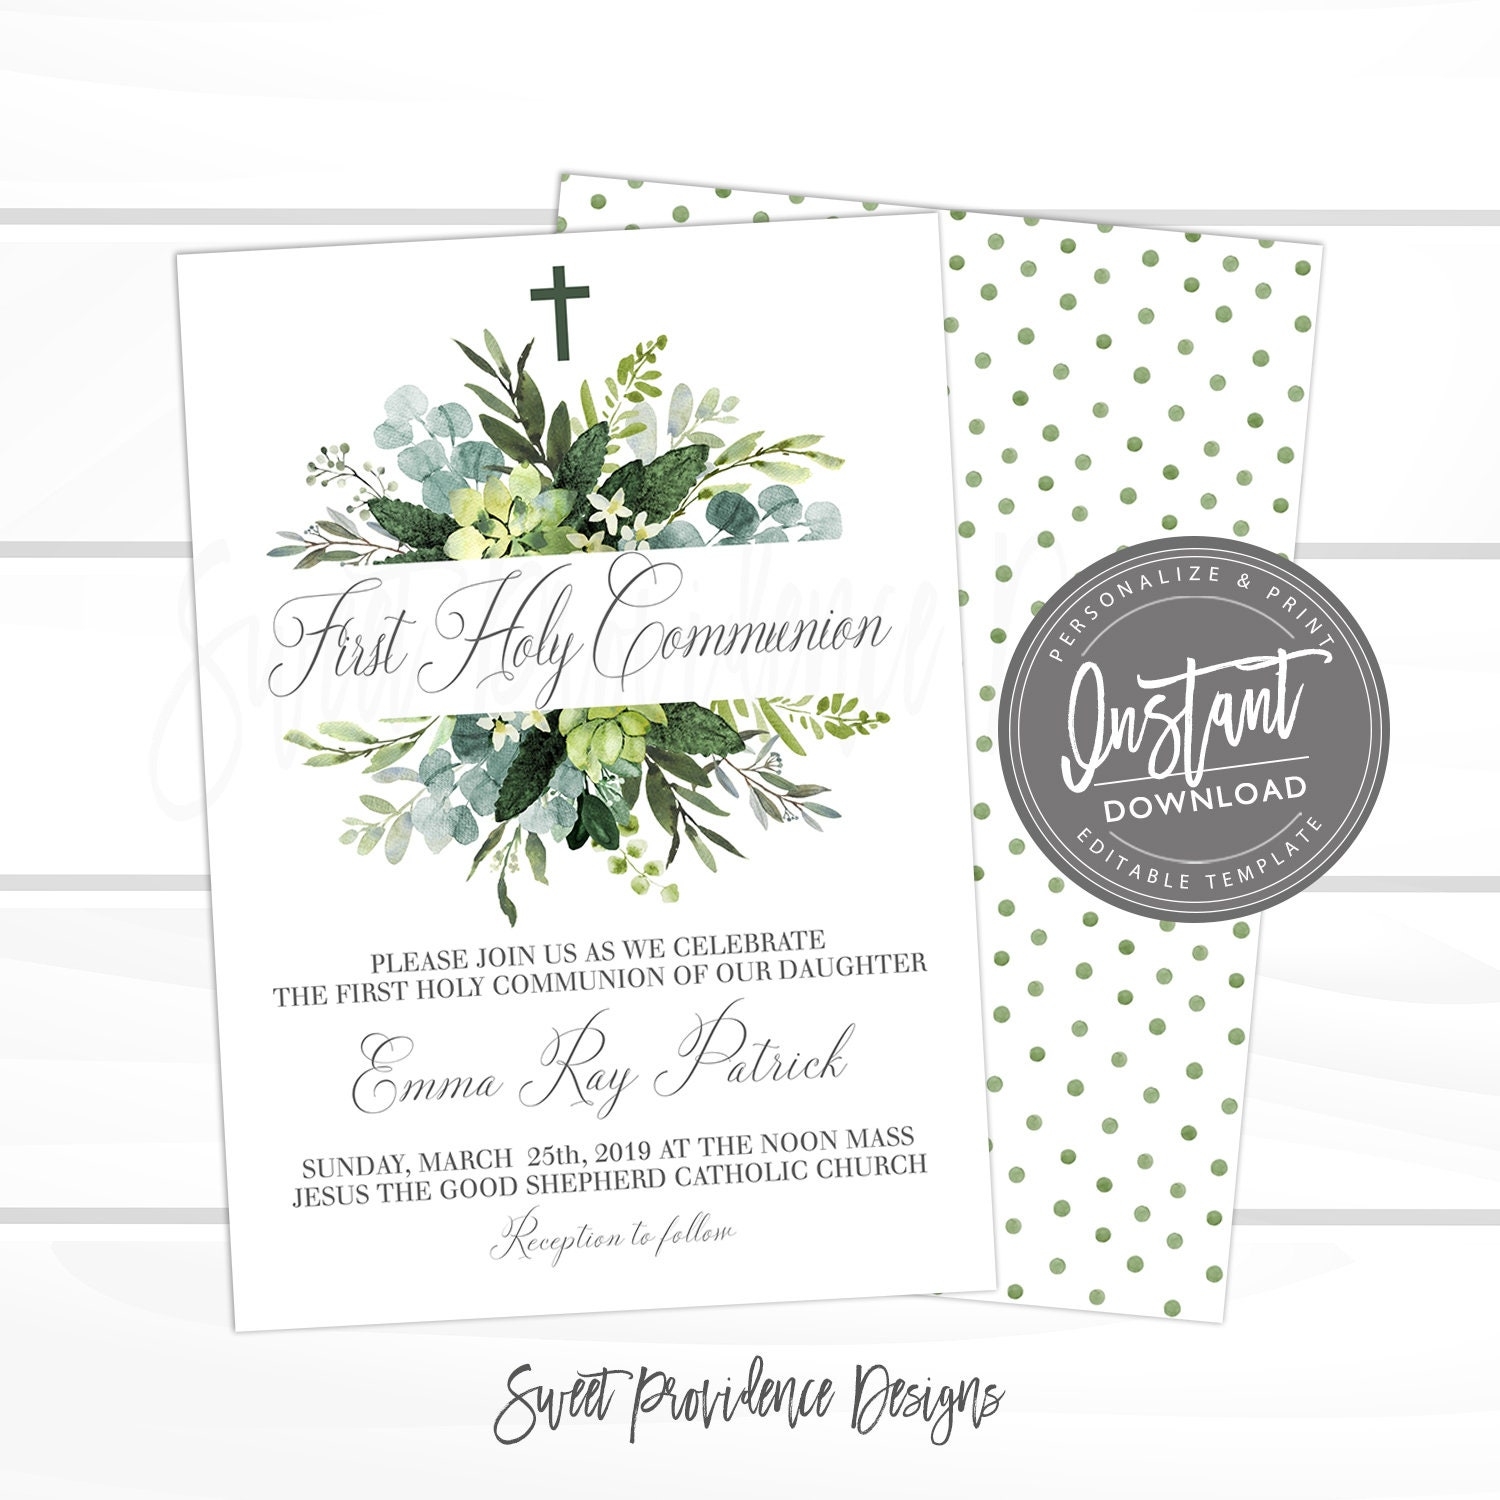 First Communion Invitation EDITABLE Greenery 1st Holy Communion Party Invitation PRINTABLE Boy First Religious Invite Instant Access Sweet Providence Designs - Free Printable 1st Communion Invitations